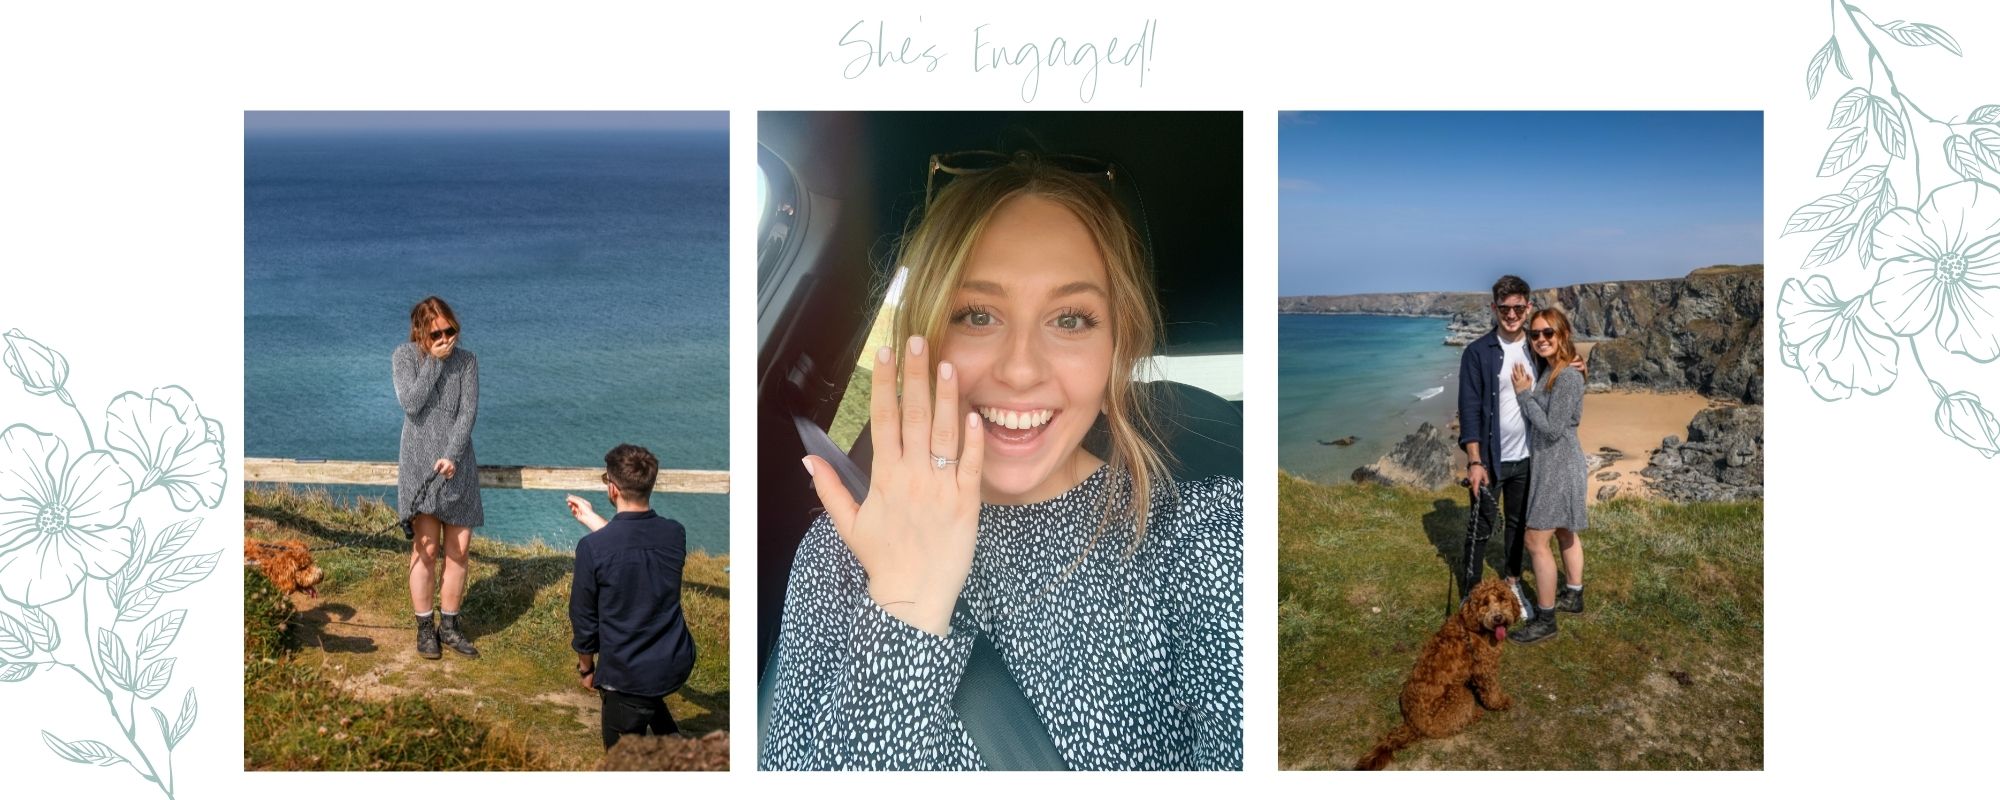 Three photographs of Abi and Jake's engagement. The first photo shows Jake on one knee holding the ring to Abi, overlooking the ocean. The middle is a selfie of Abi holding up her new engagement ring and the third is a posed photograph of the couple and their dog overlooking Bedruthan Steps beach.